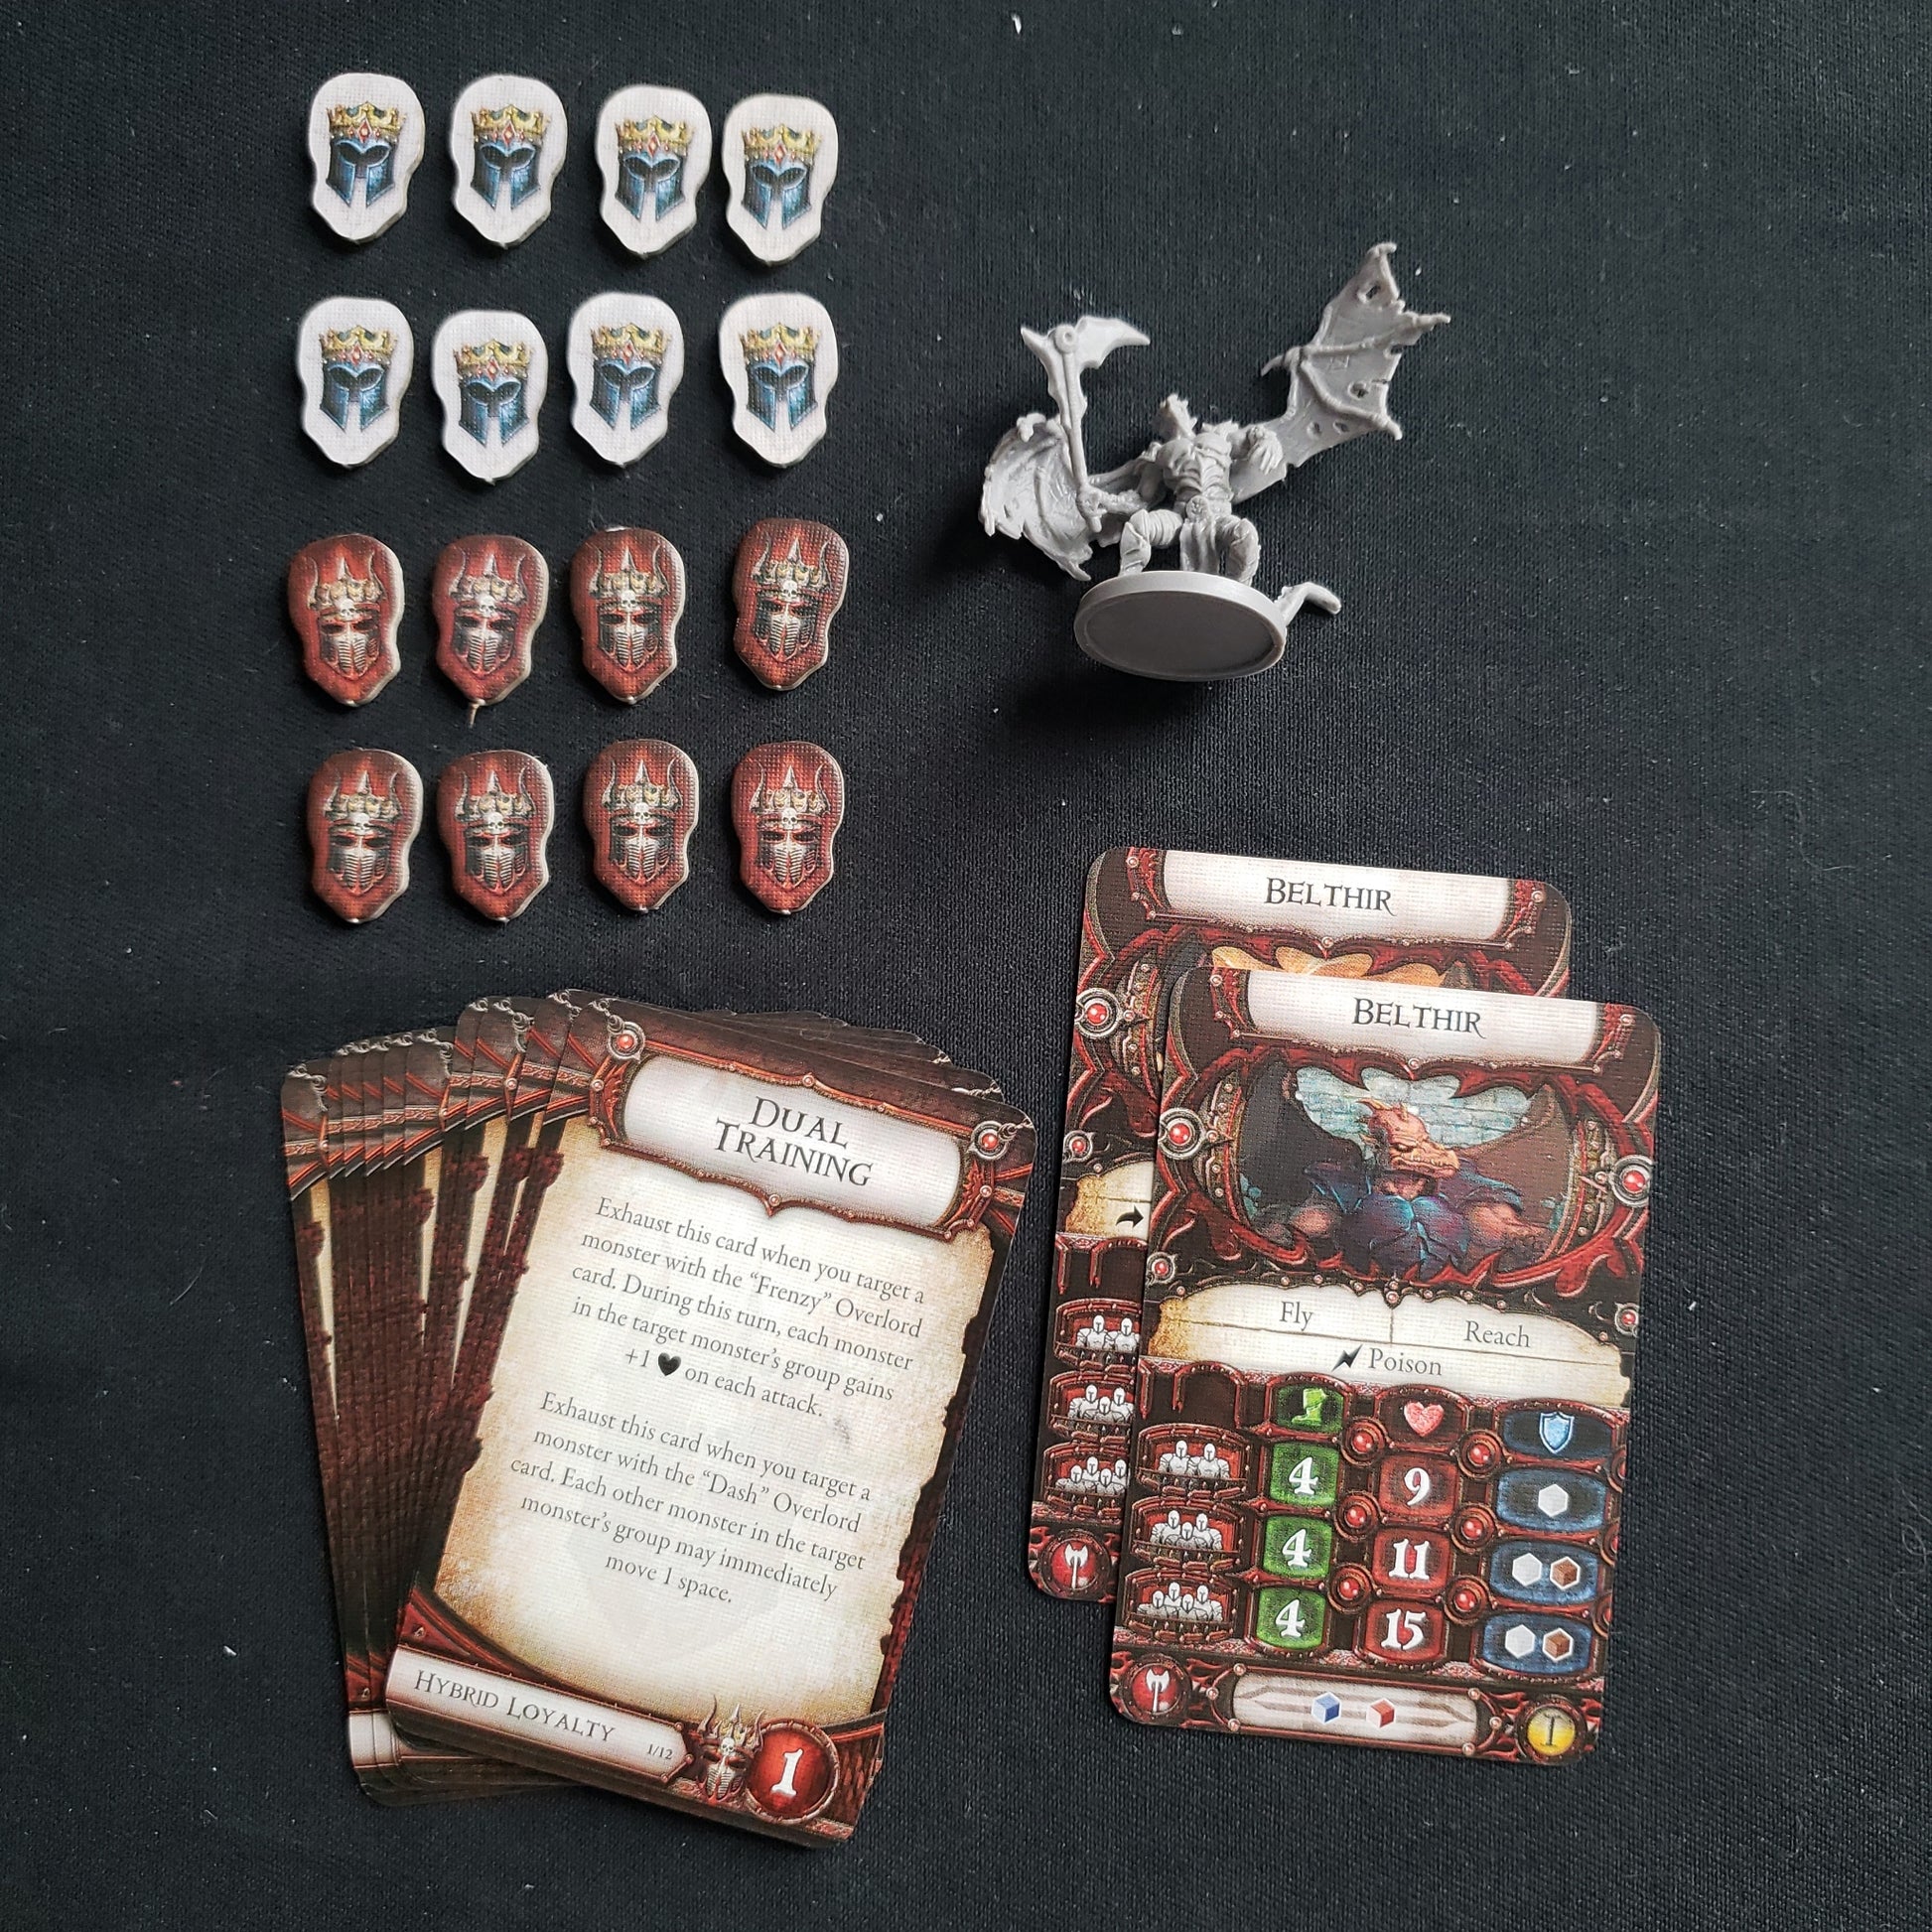 Image shows the components for the Belthir Lieutenant Pack expansion for the board game Descent: Journeys in the Dark Second Edition